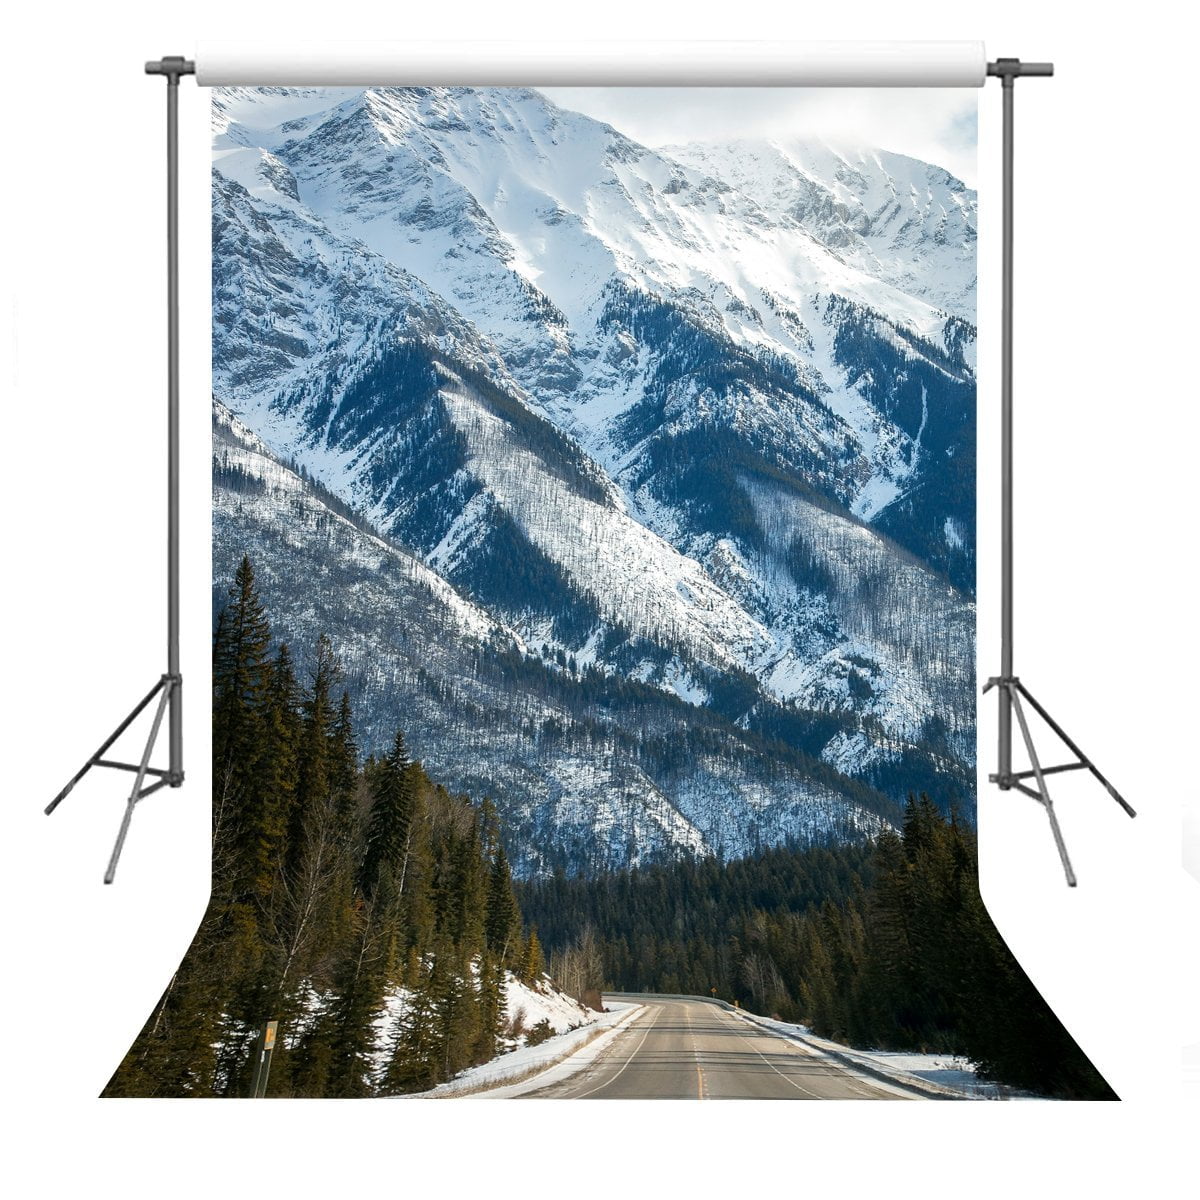 Mountain 10x12 FT Photo Backdrops,View of Mountain Matterhorn in a Peaceful Summer Day with Sun Rays Meadow Print Background for Photography Kids Adult Photo Booth Video Shoot Vinyl Studio Props